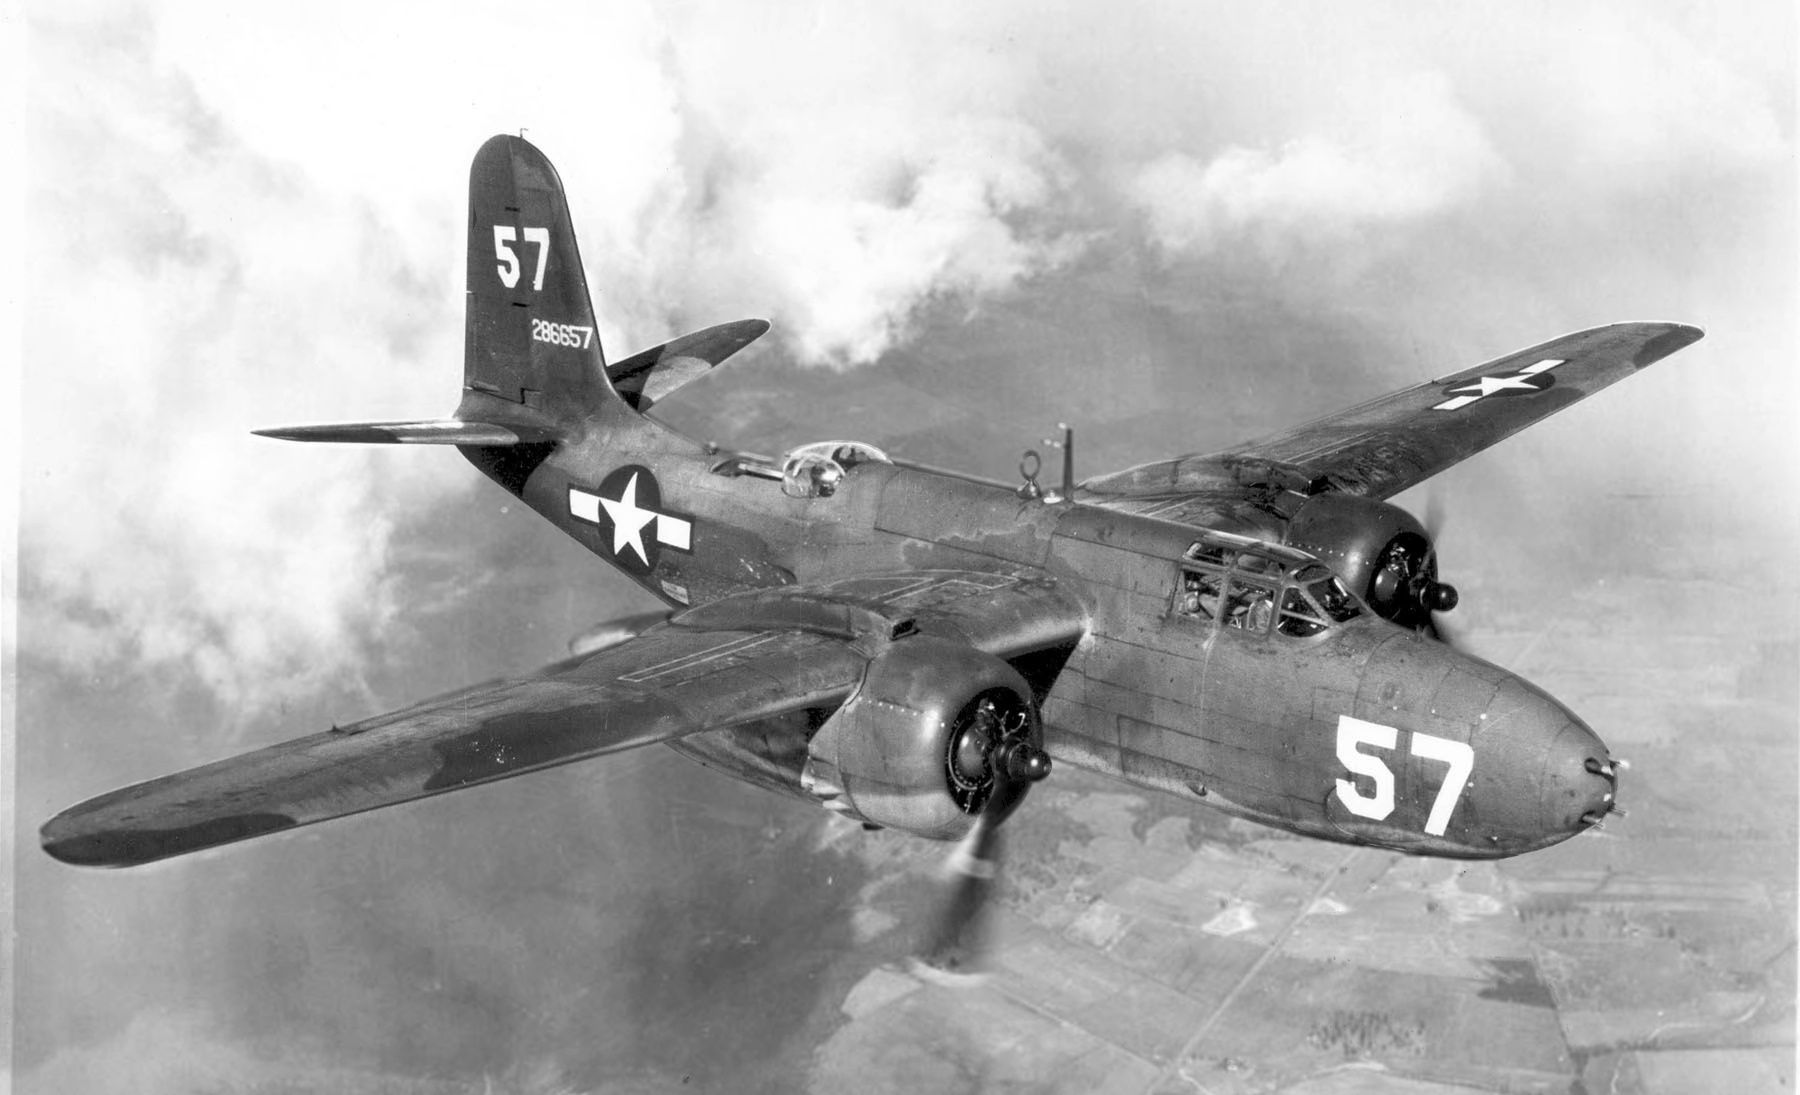 Army Air Corps A-20 Havoc plane during WWII